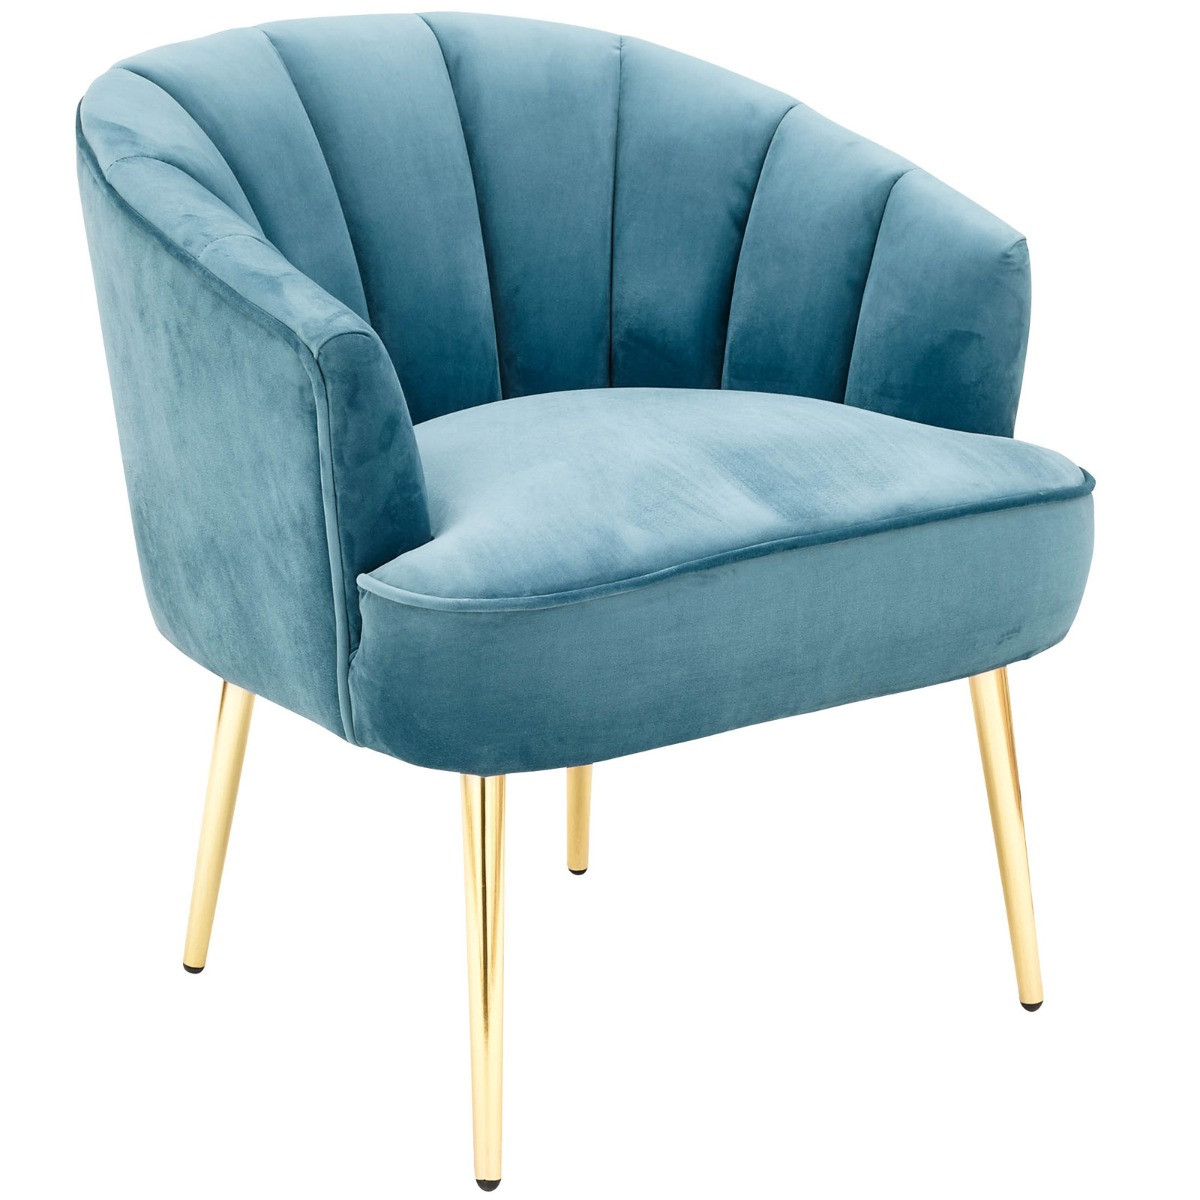 Pettine Upholstered Fabric Accent Chair - Teal>